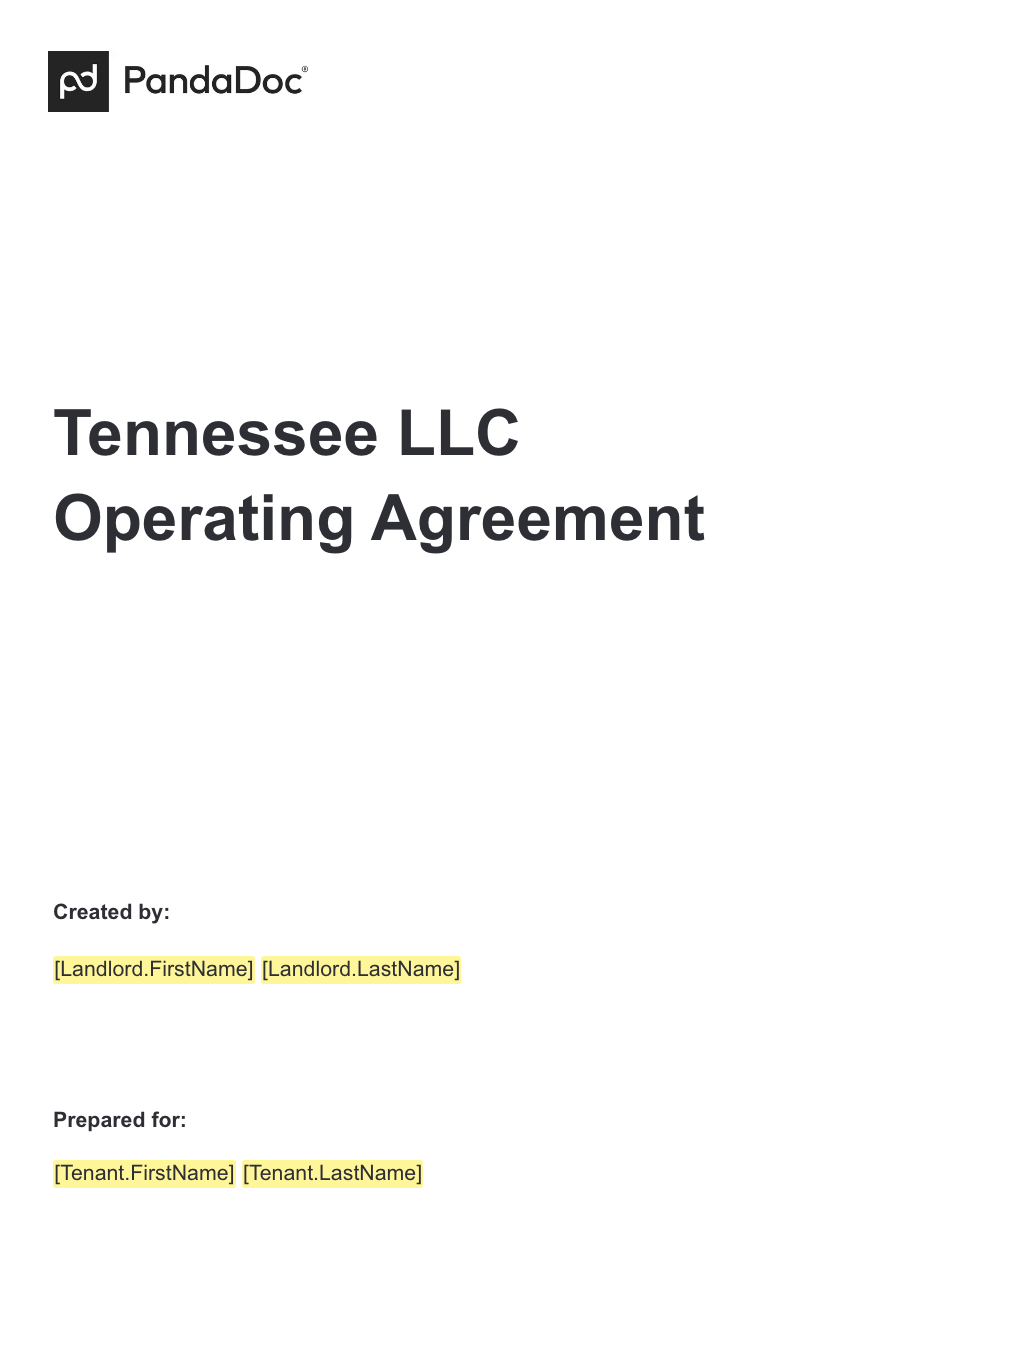 Tennessee LLC Operating Agreements